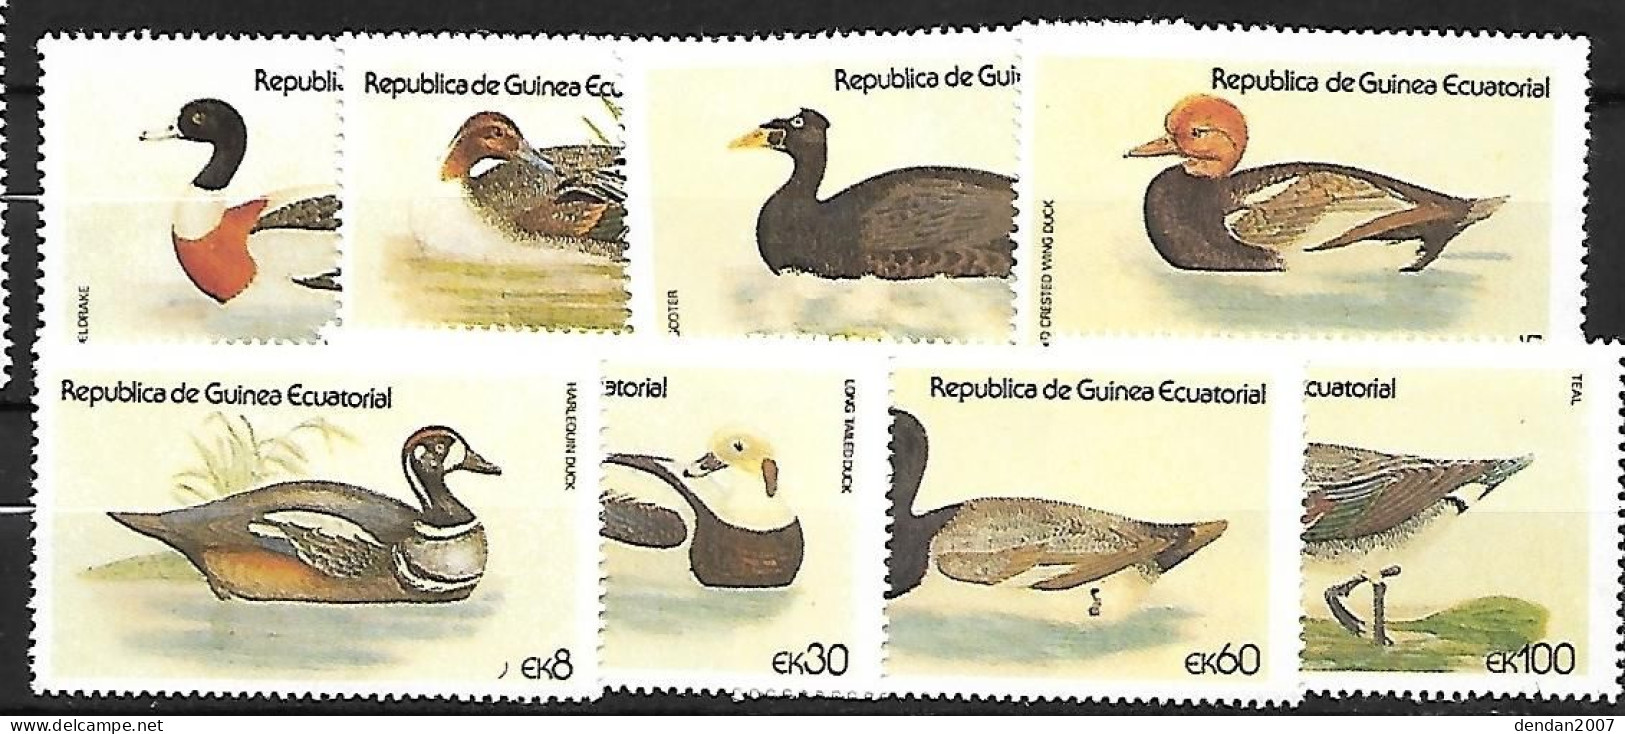 Equatorial Guinea - MNH ** 1978 - Complete Set 8/8 : 8 Different Ducks And Gooses - Canards